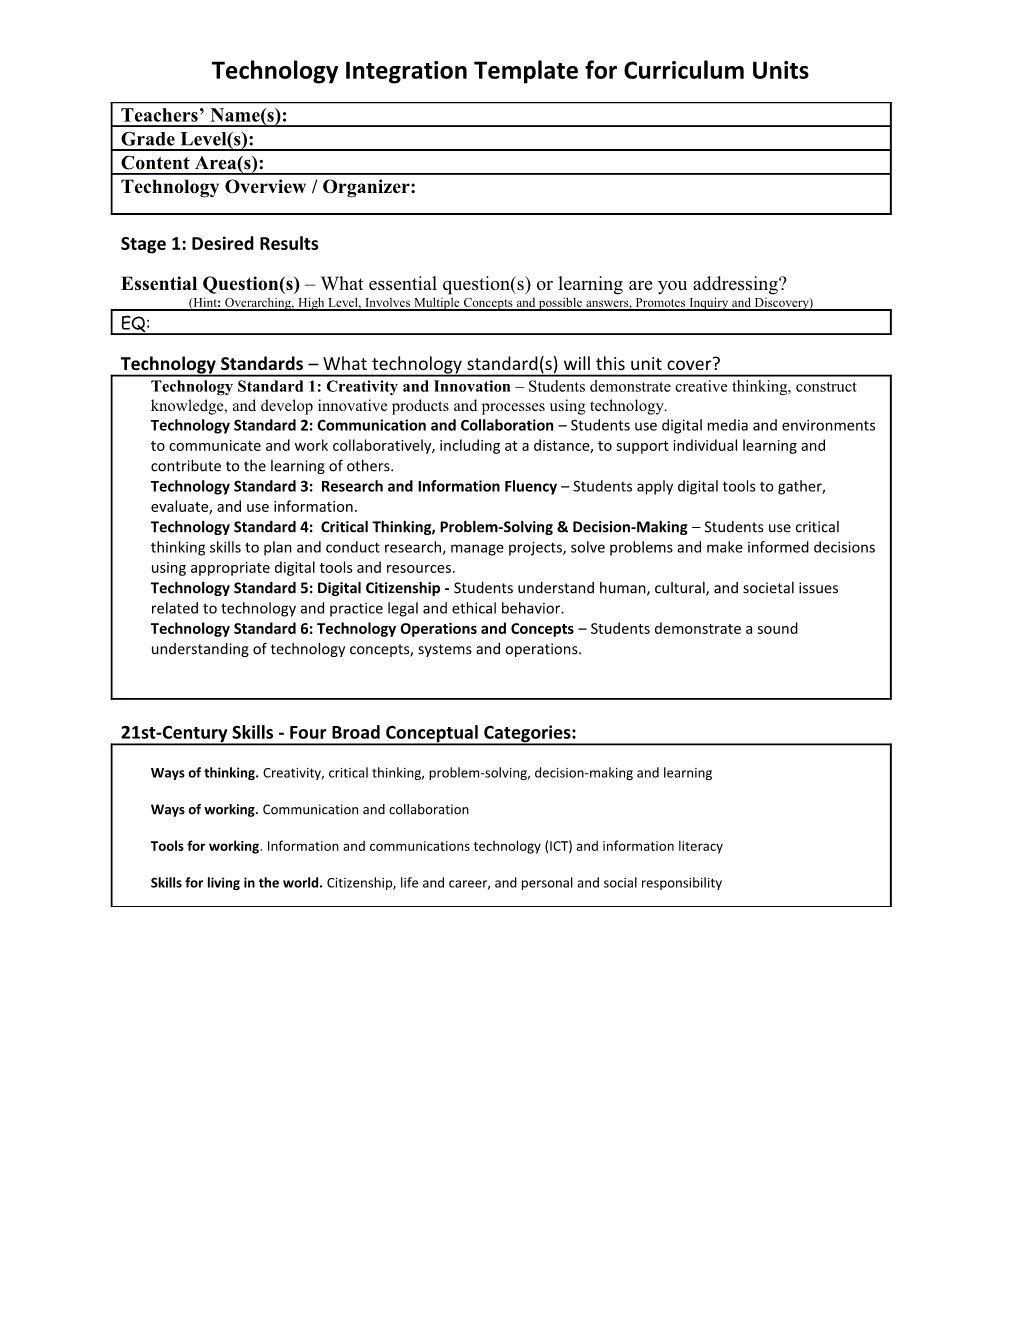 Technology Integration Template for Curriculum Units